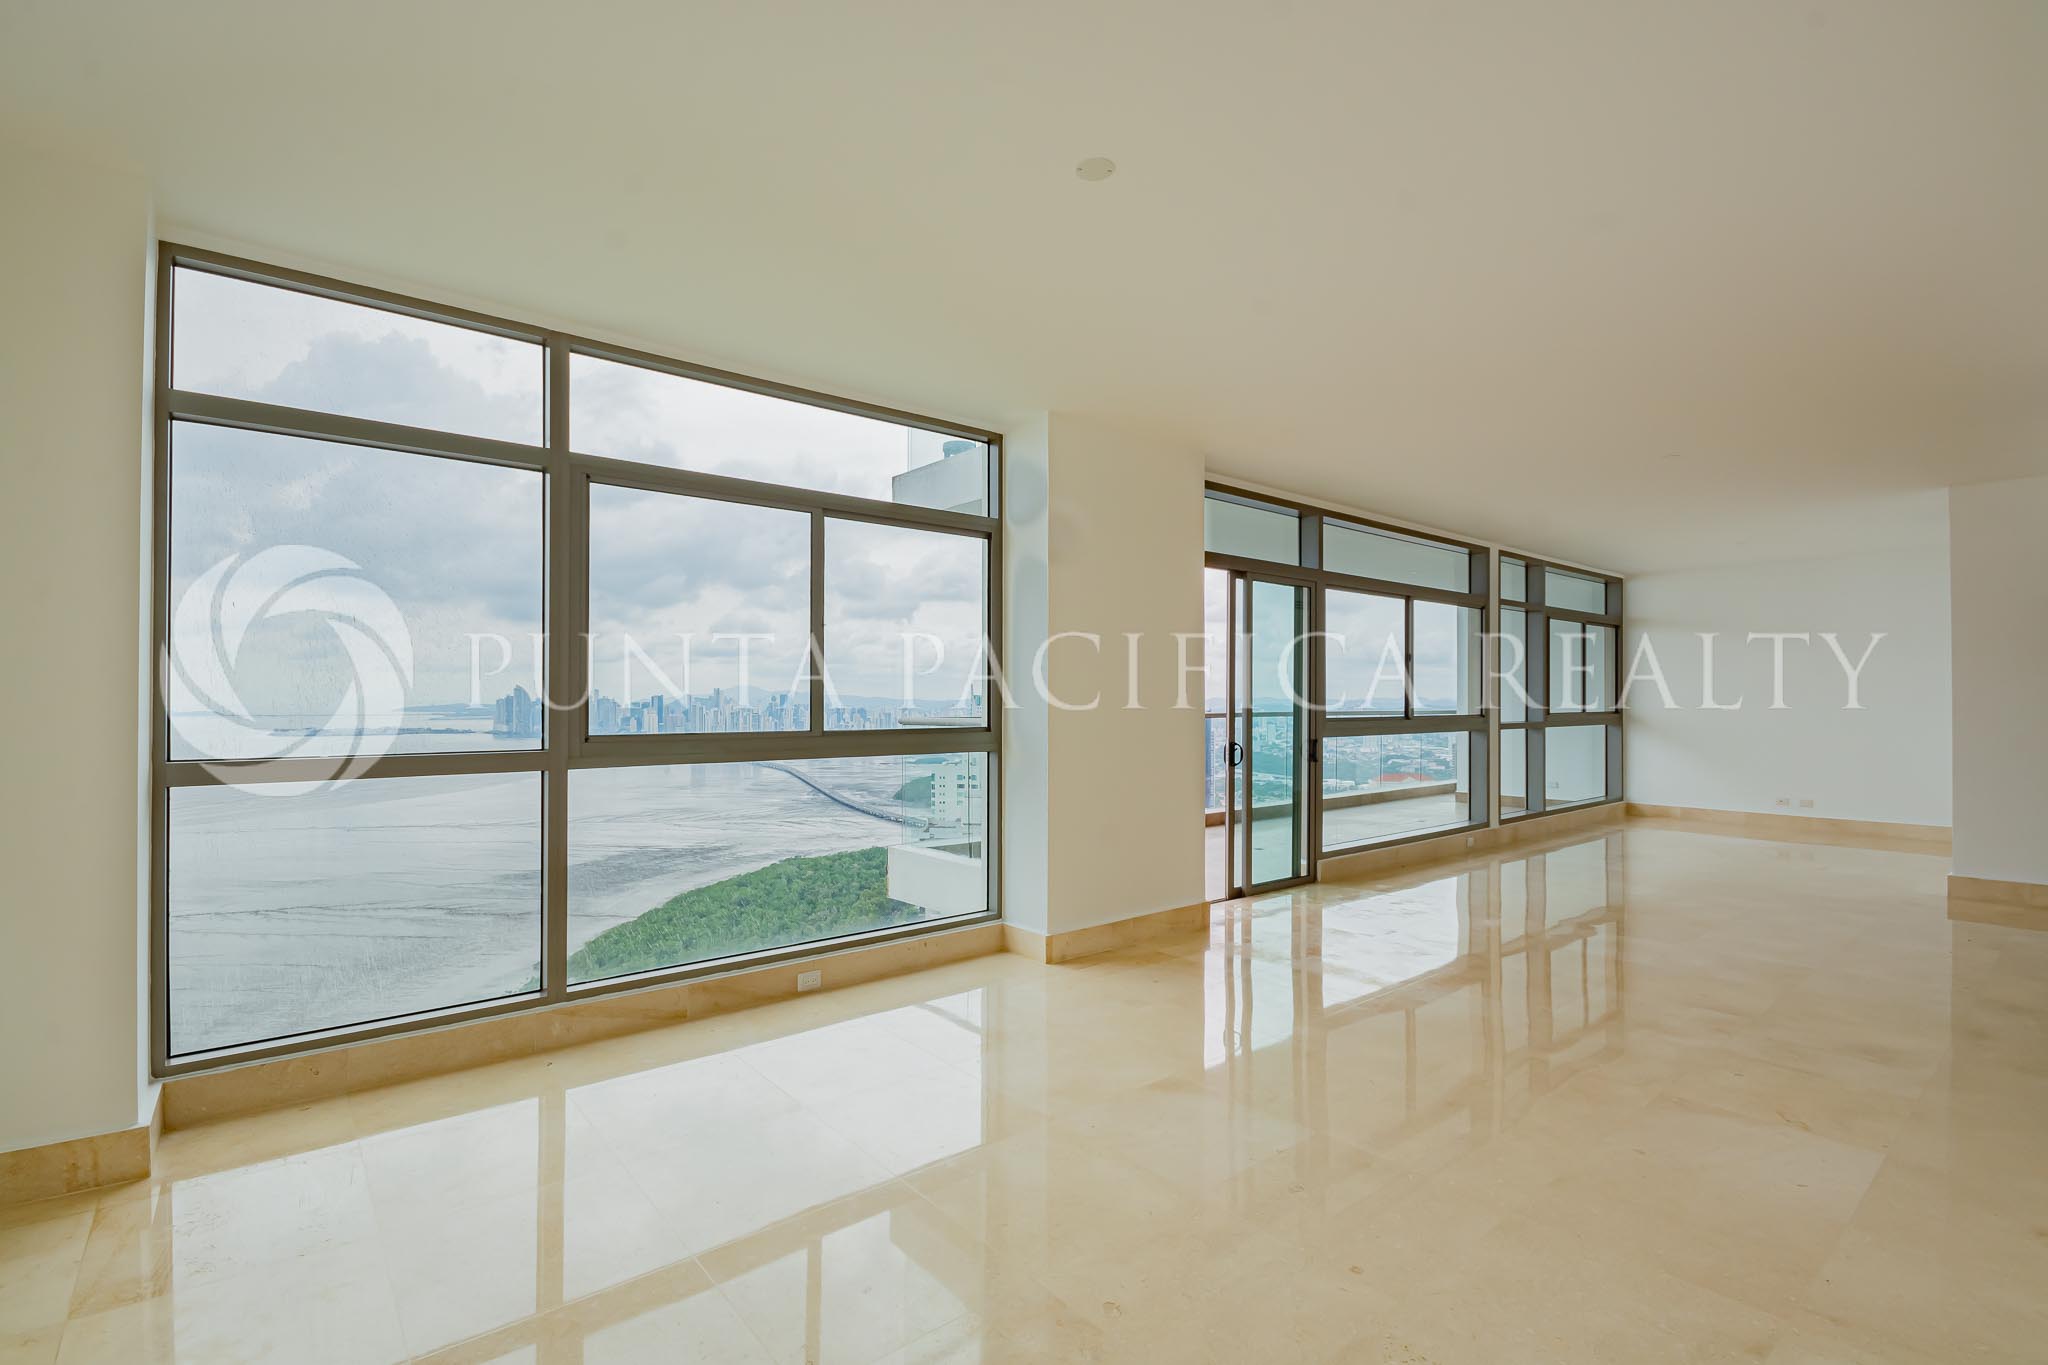 For Sale | Exclusive and Elegantly Apartment with Brilliance Design In Paramount Tower | Great For Investment | With Panoramic Views of The City and The Ocean